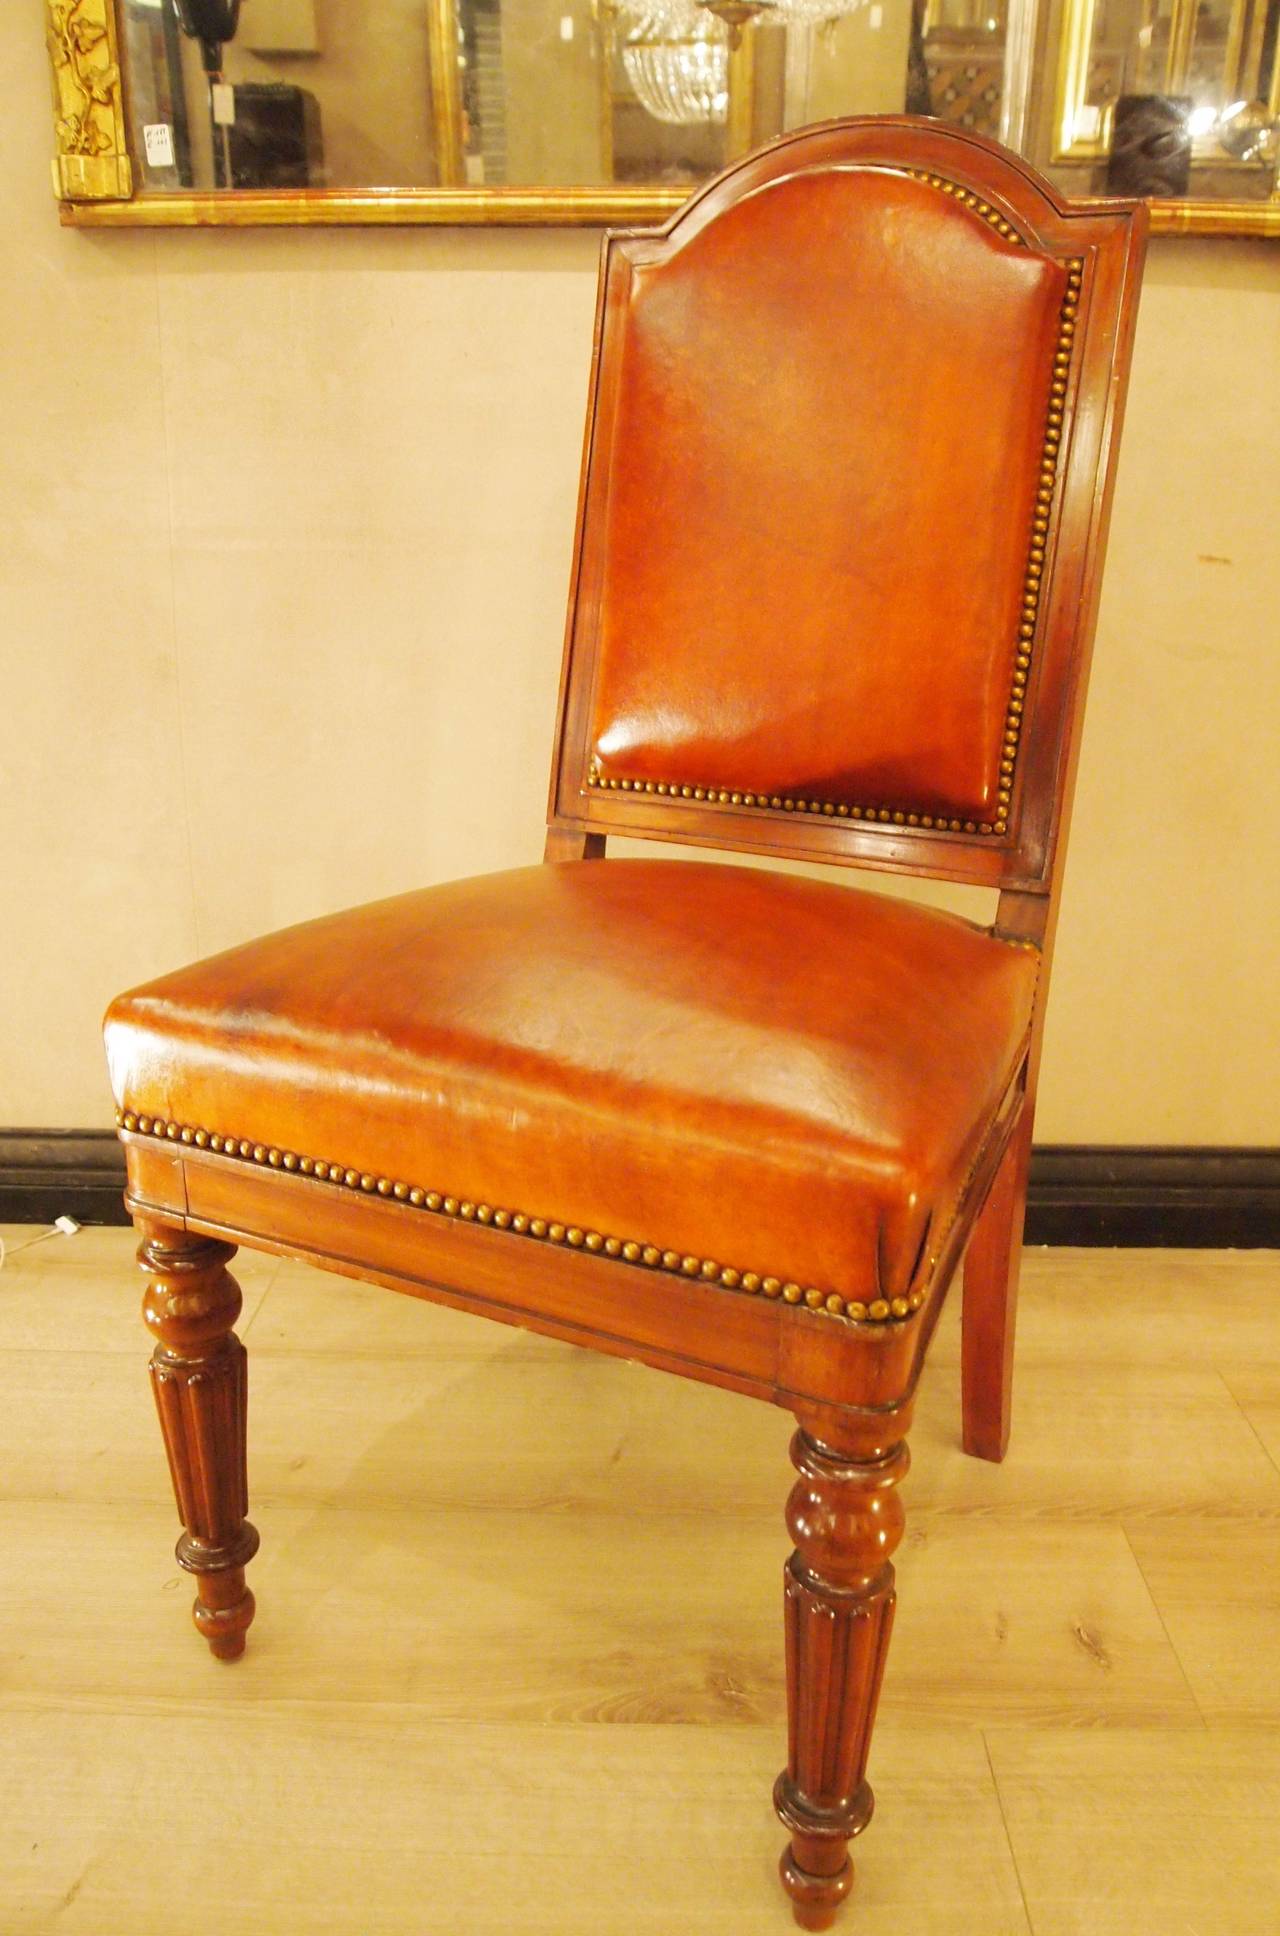 Nice suite of 12 French dining chairs

in mahogany recovered with a thick gold leather.

France, 19th century.

Measures: H 99 cm, H seat 47 cm.

Length 49 cm, width 51 cm.